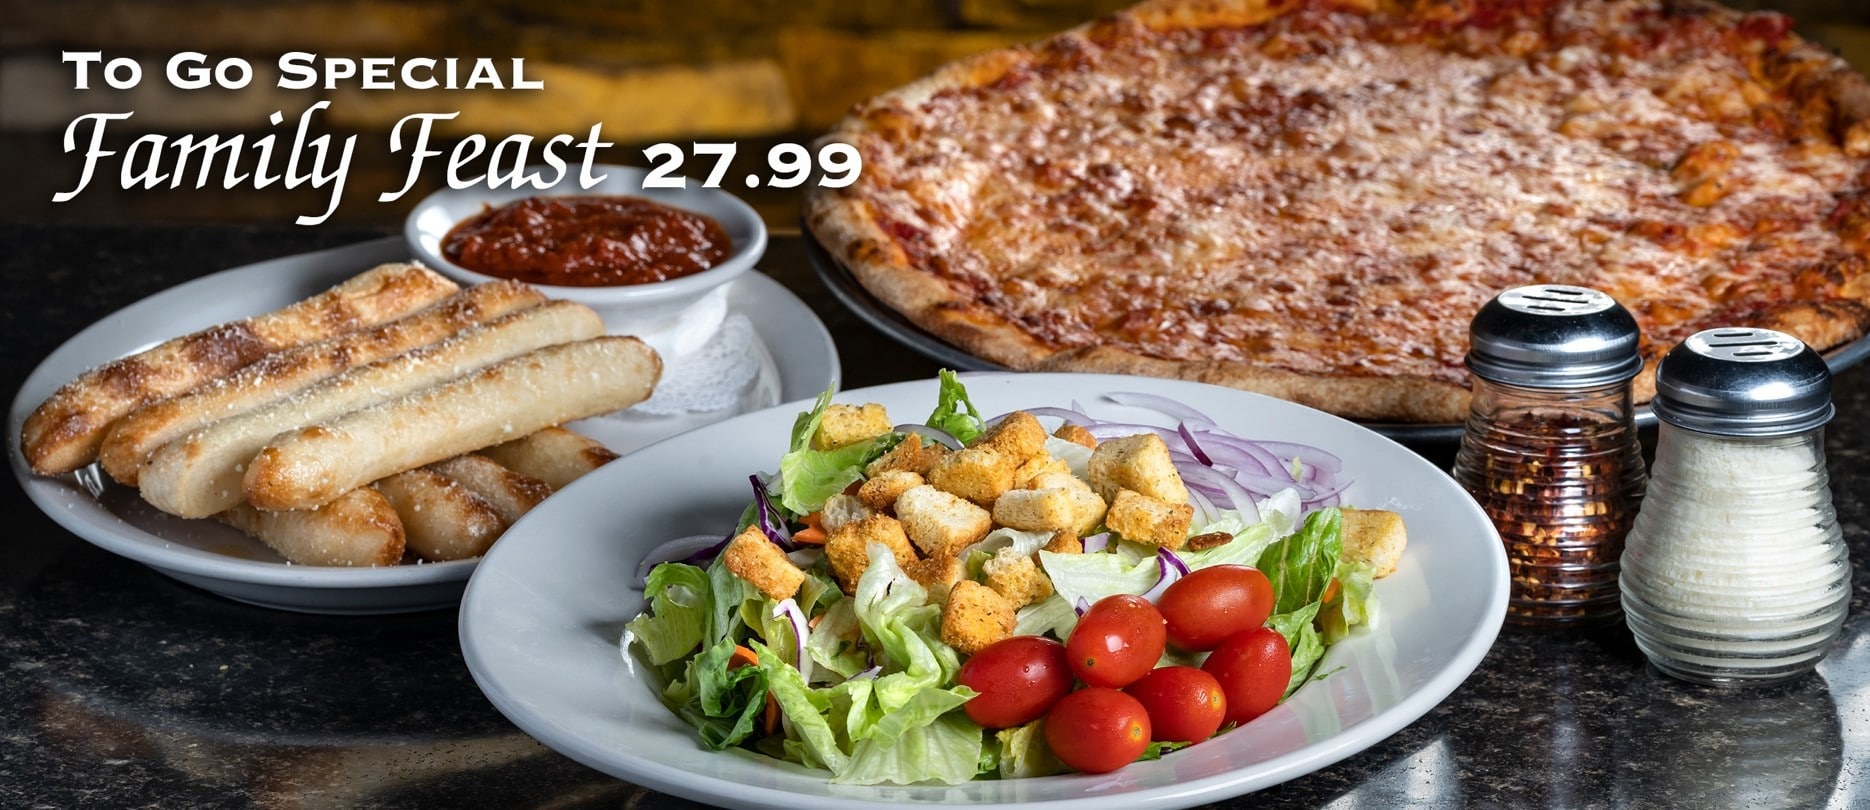 Our delicious Family Feast is a bargain to feed your whole family!